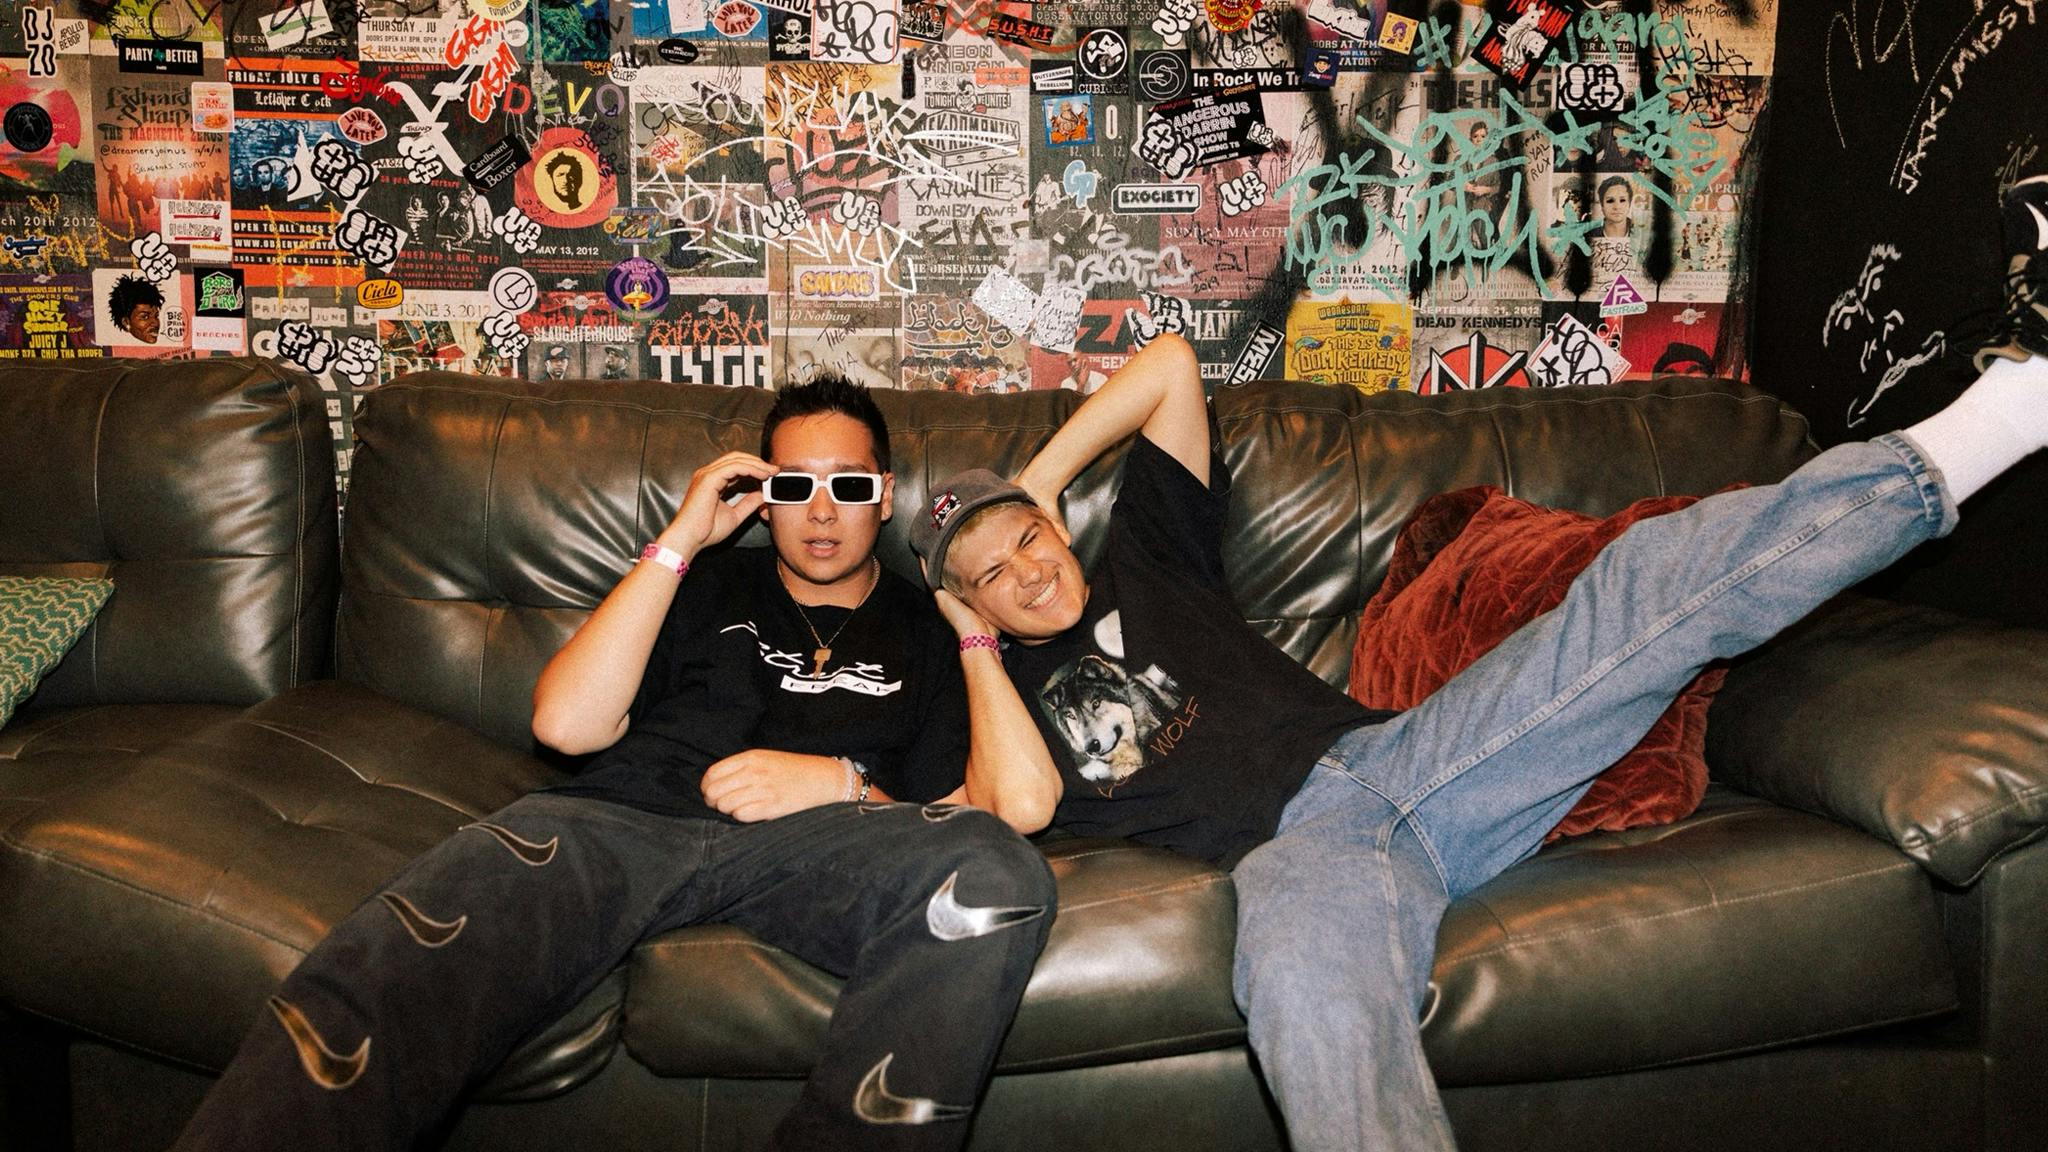 Joey Valence & Brae: “Every show we play is like a giant house party”